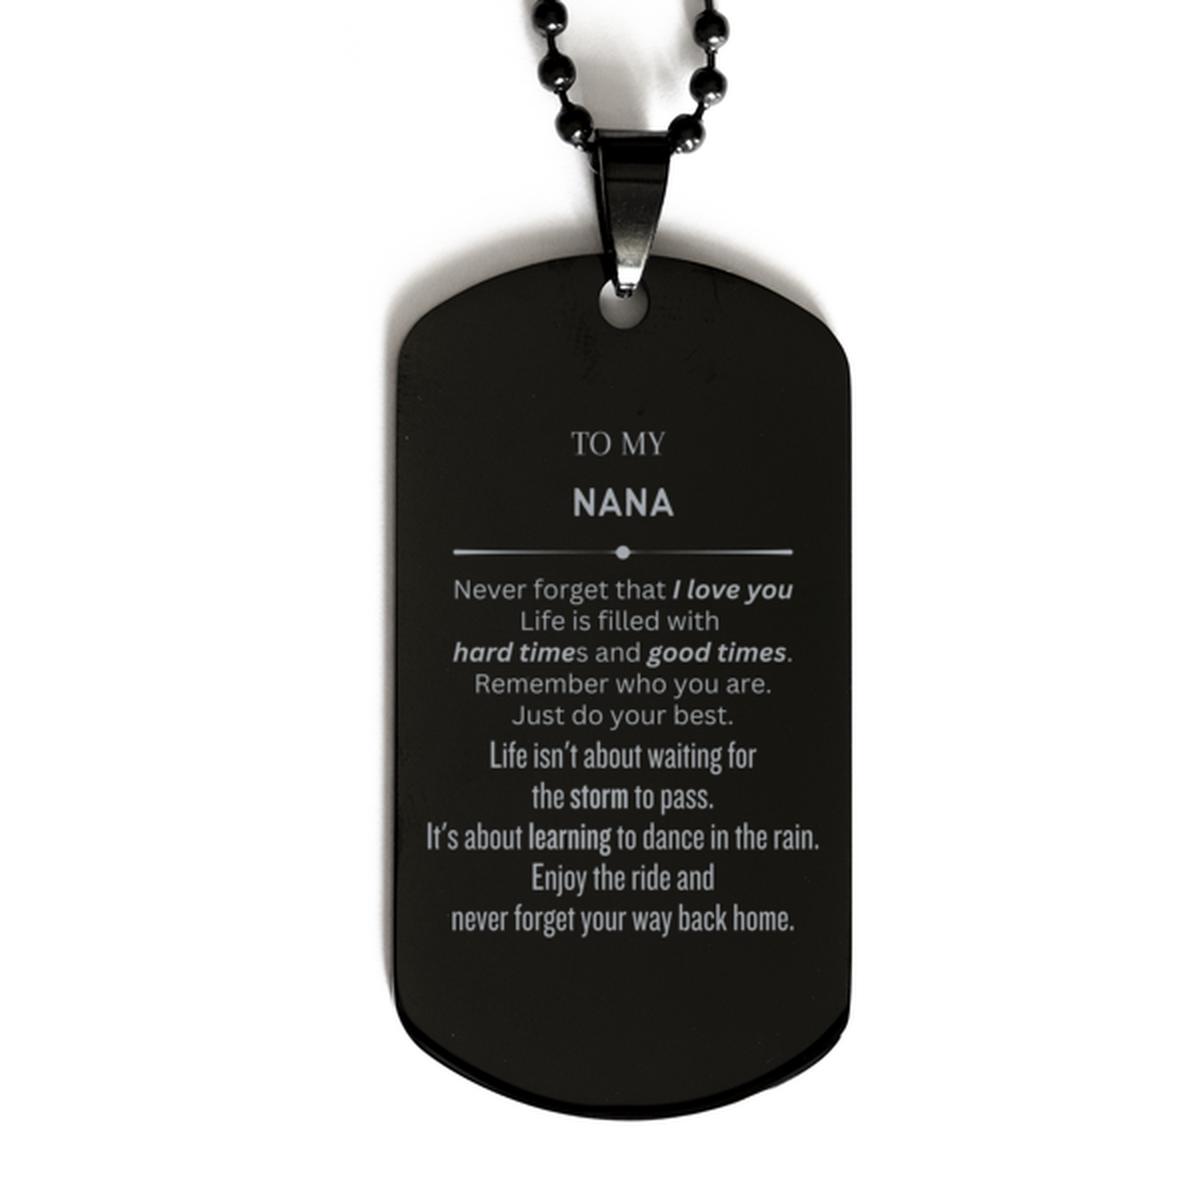 Christmas Nana Black Dog Tag Gifts, To My Nana Birthday Thank You Gifts For Nana, Graduation Unique Gifts For Nana To My Nana Never forget that I love you life is filled with hard times and good times. Remember who you are. Just do your best